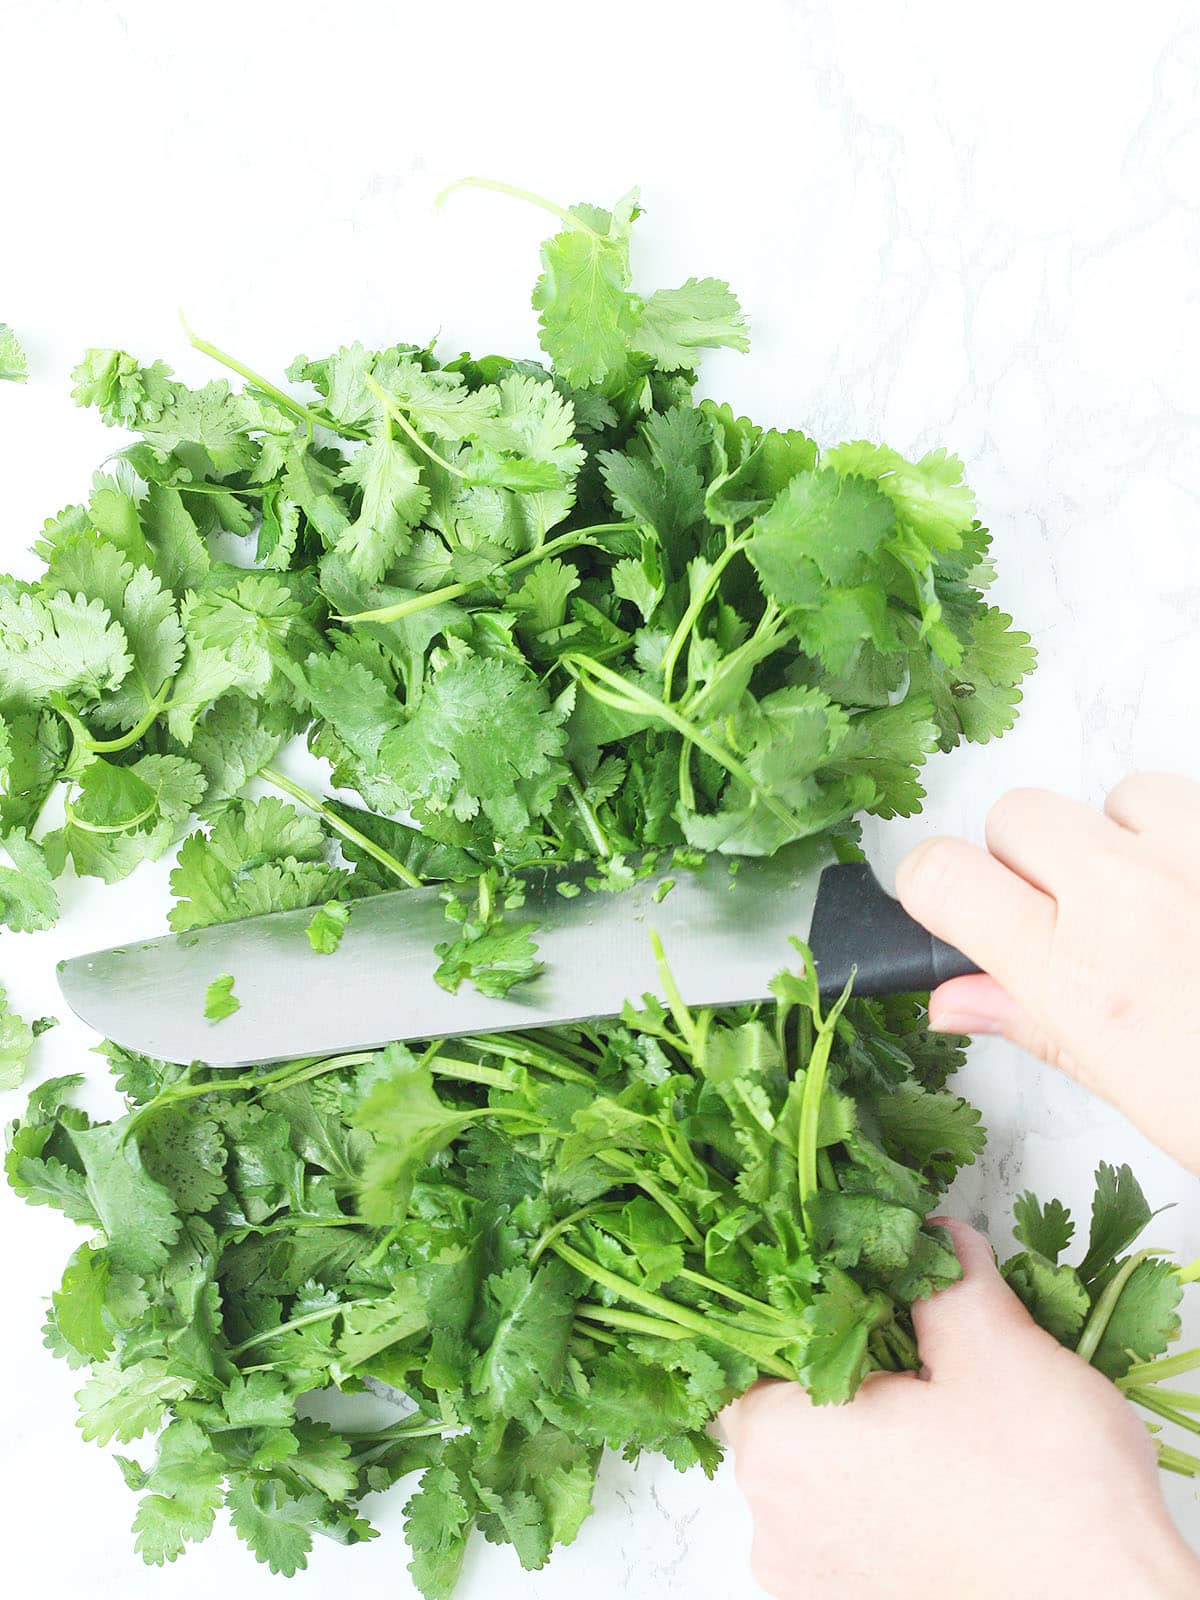 chopping cilantro leaves off the stems with a sharp knife